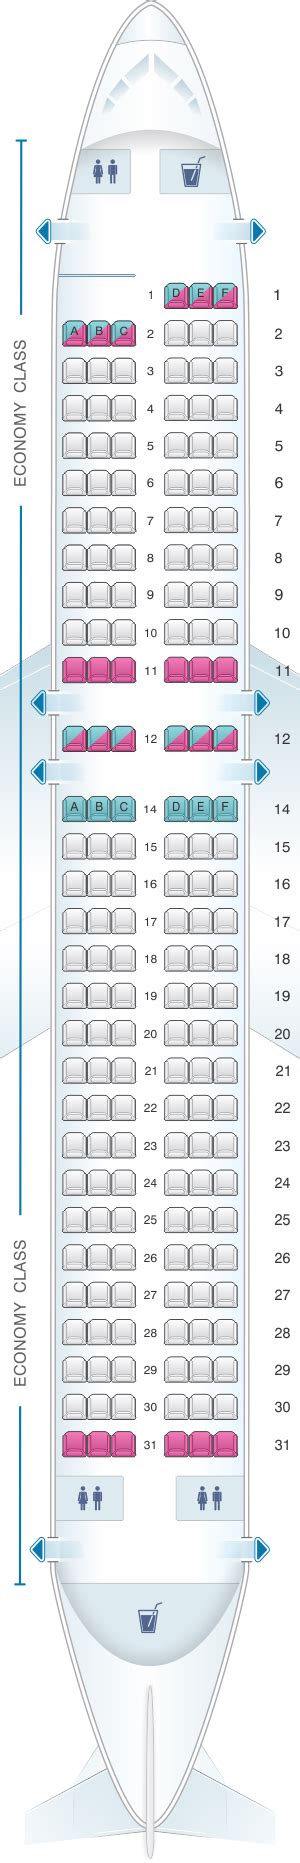 30-34". Seat 5C is a standard economy aisle seat with 30-34" of seat pitch, which is average across Airbus A320's worldwide.